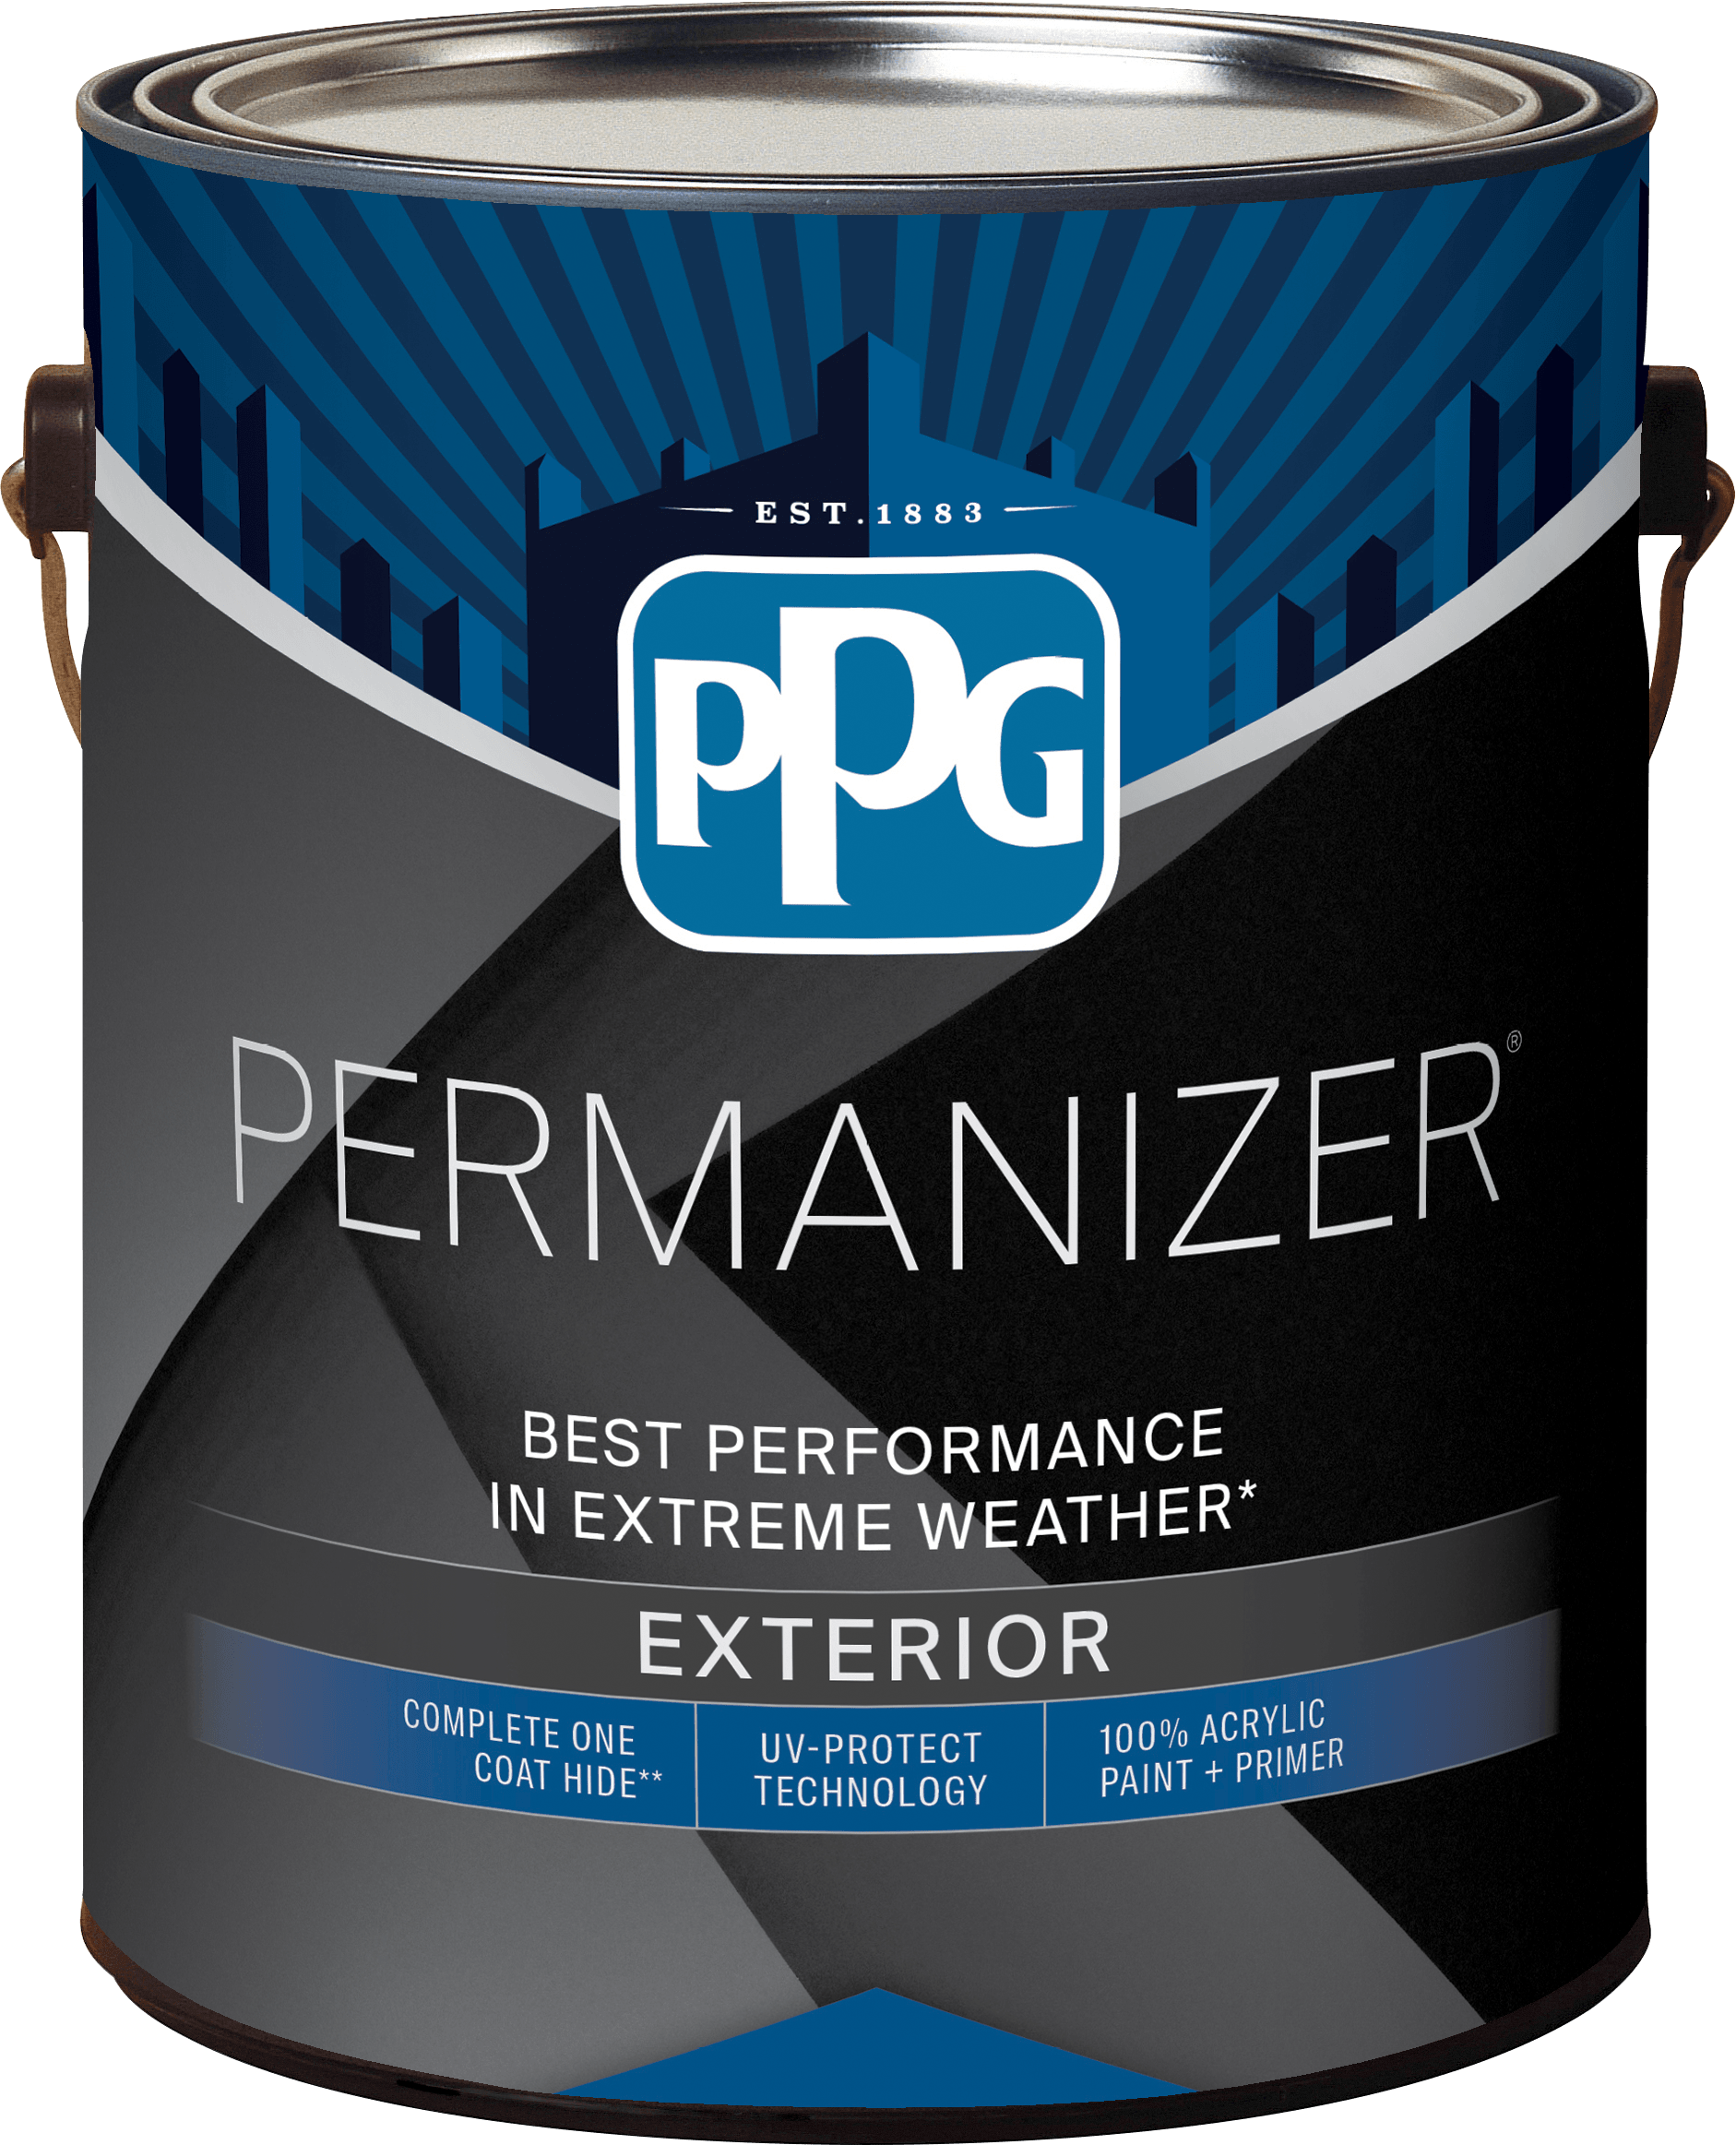 Permanizer® Exterior Acrylic Latex Paint from PPG at 21st Century Paints near Holland, Ohio (OH)